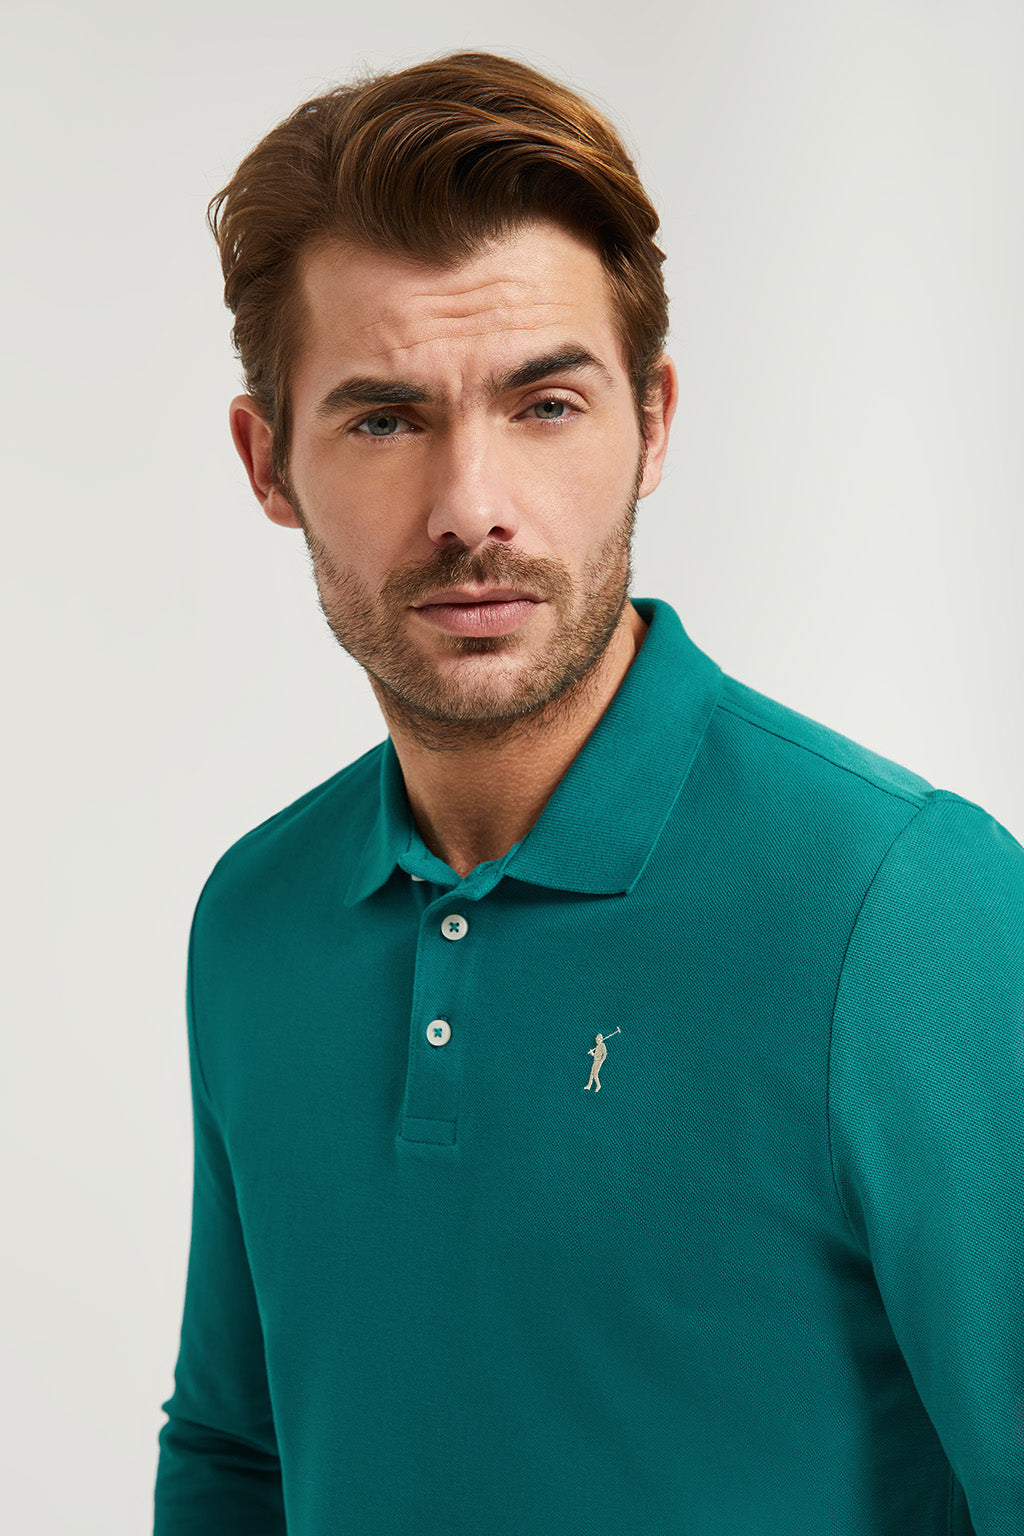 Polo manches longues vert bouteille avec logo brodé Rigby Go – Polo Club  Europe